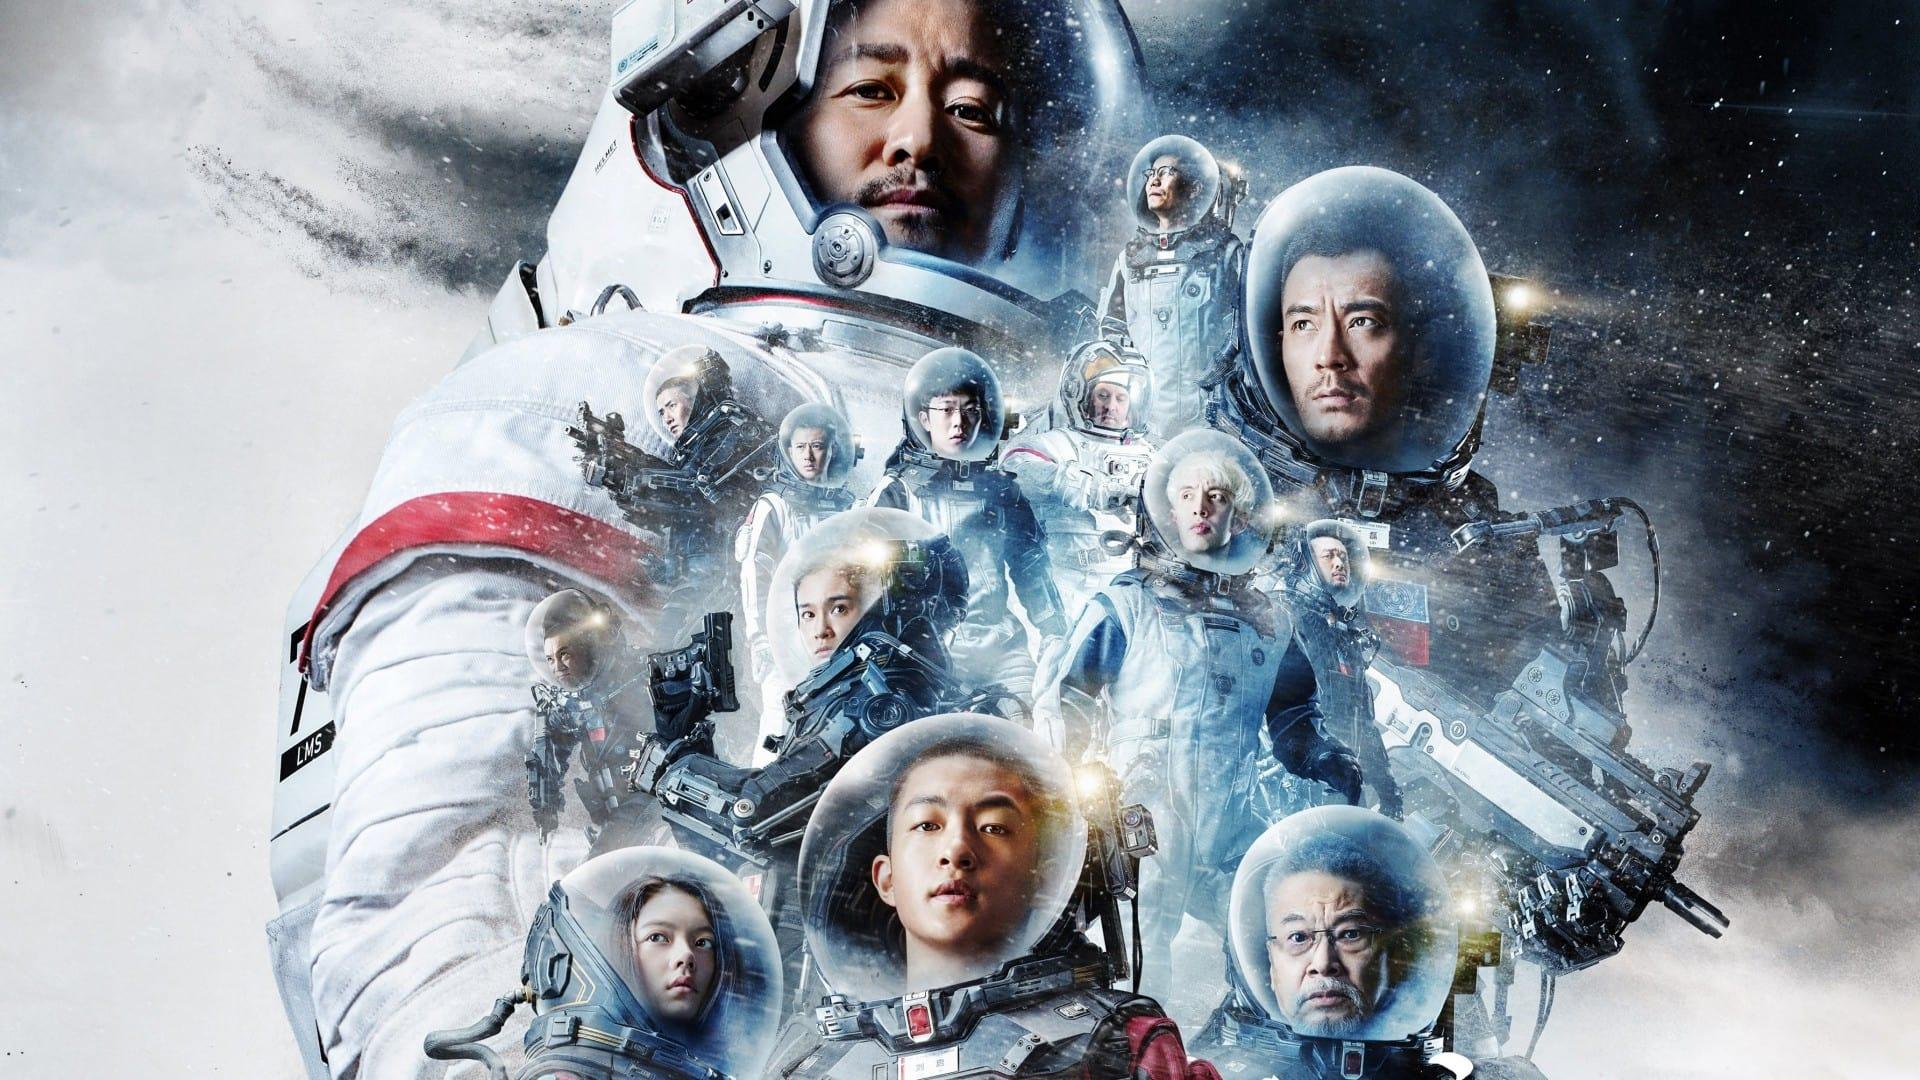 The Wandering Earth: Beyond backdrop